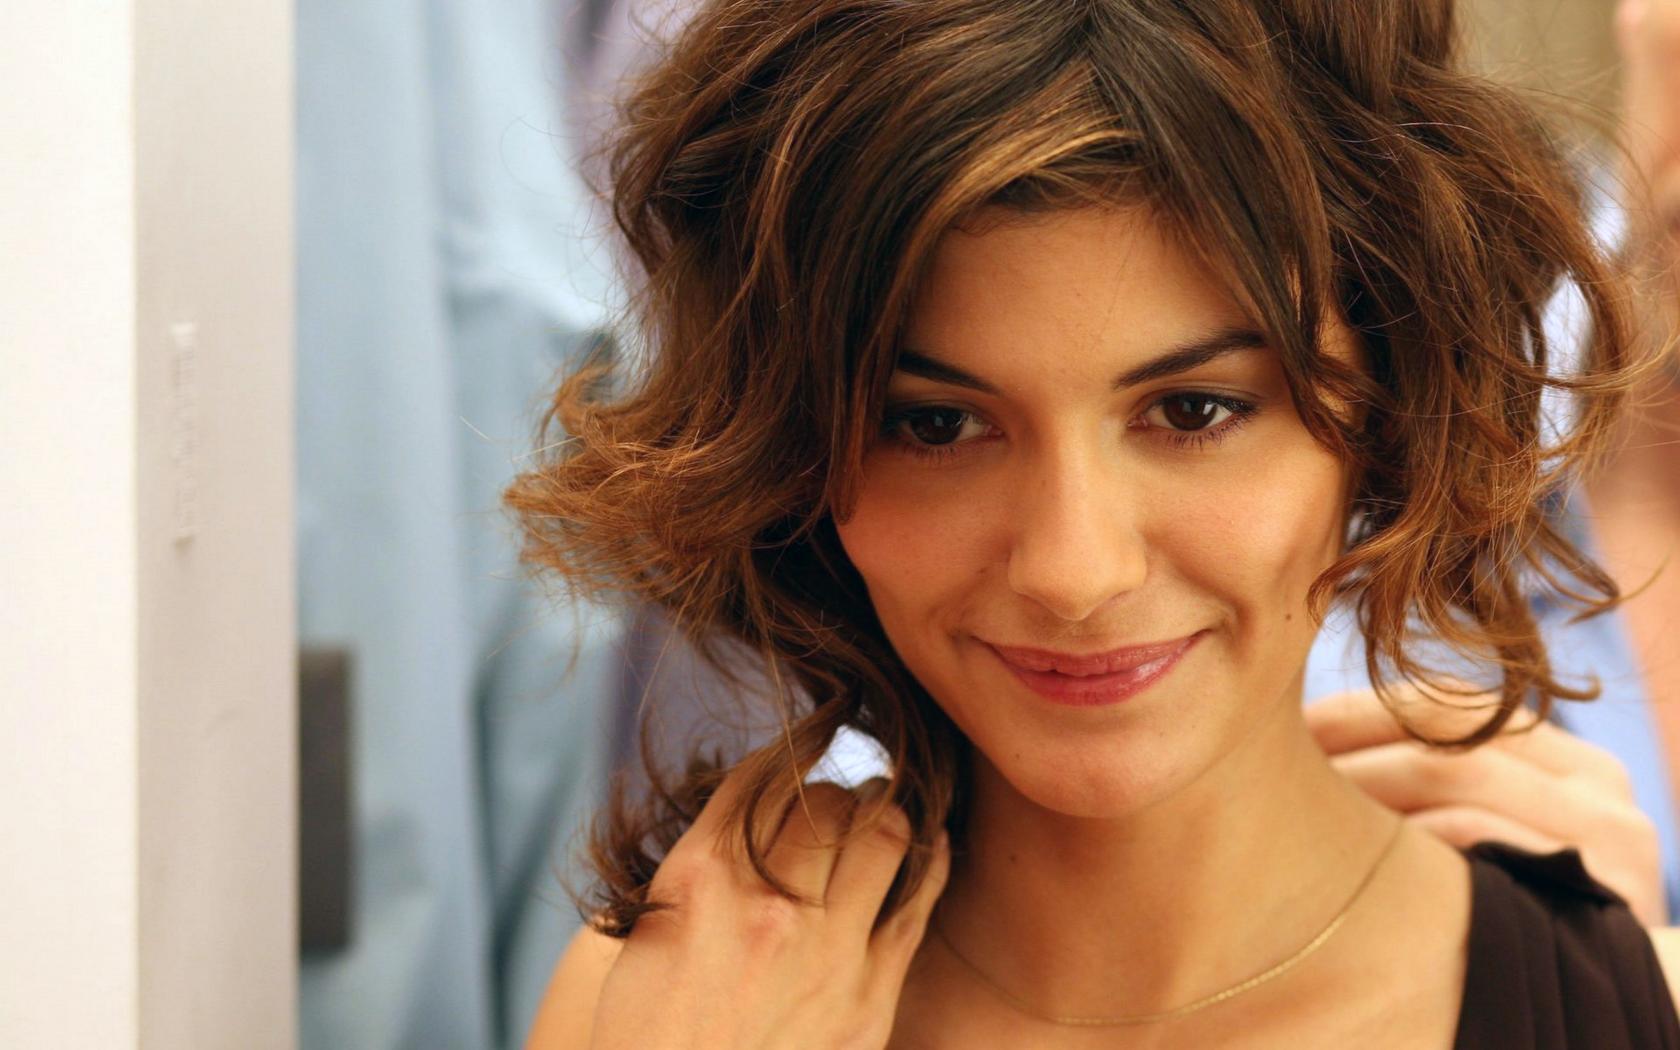 The classy Audrey Tautou (1680x1050)